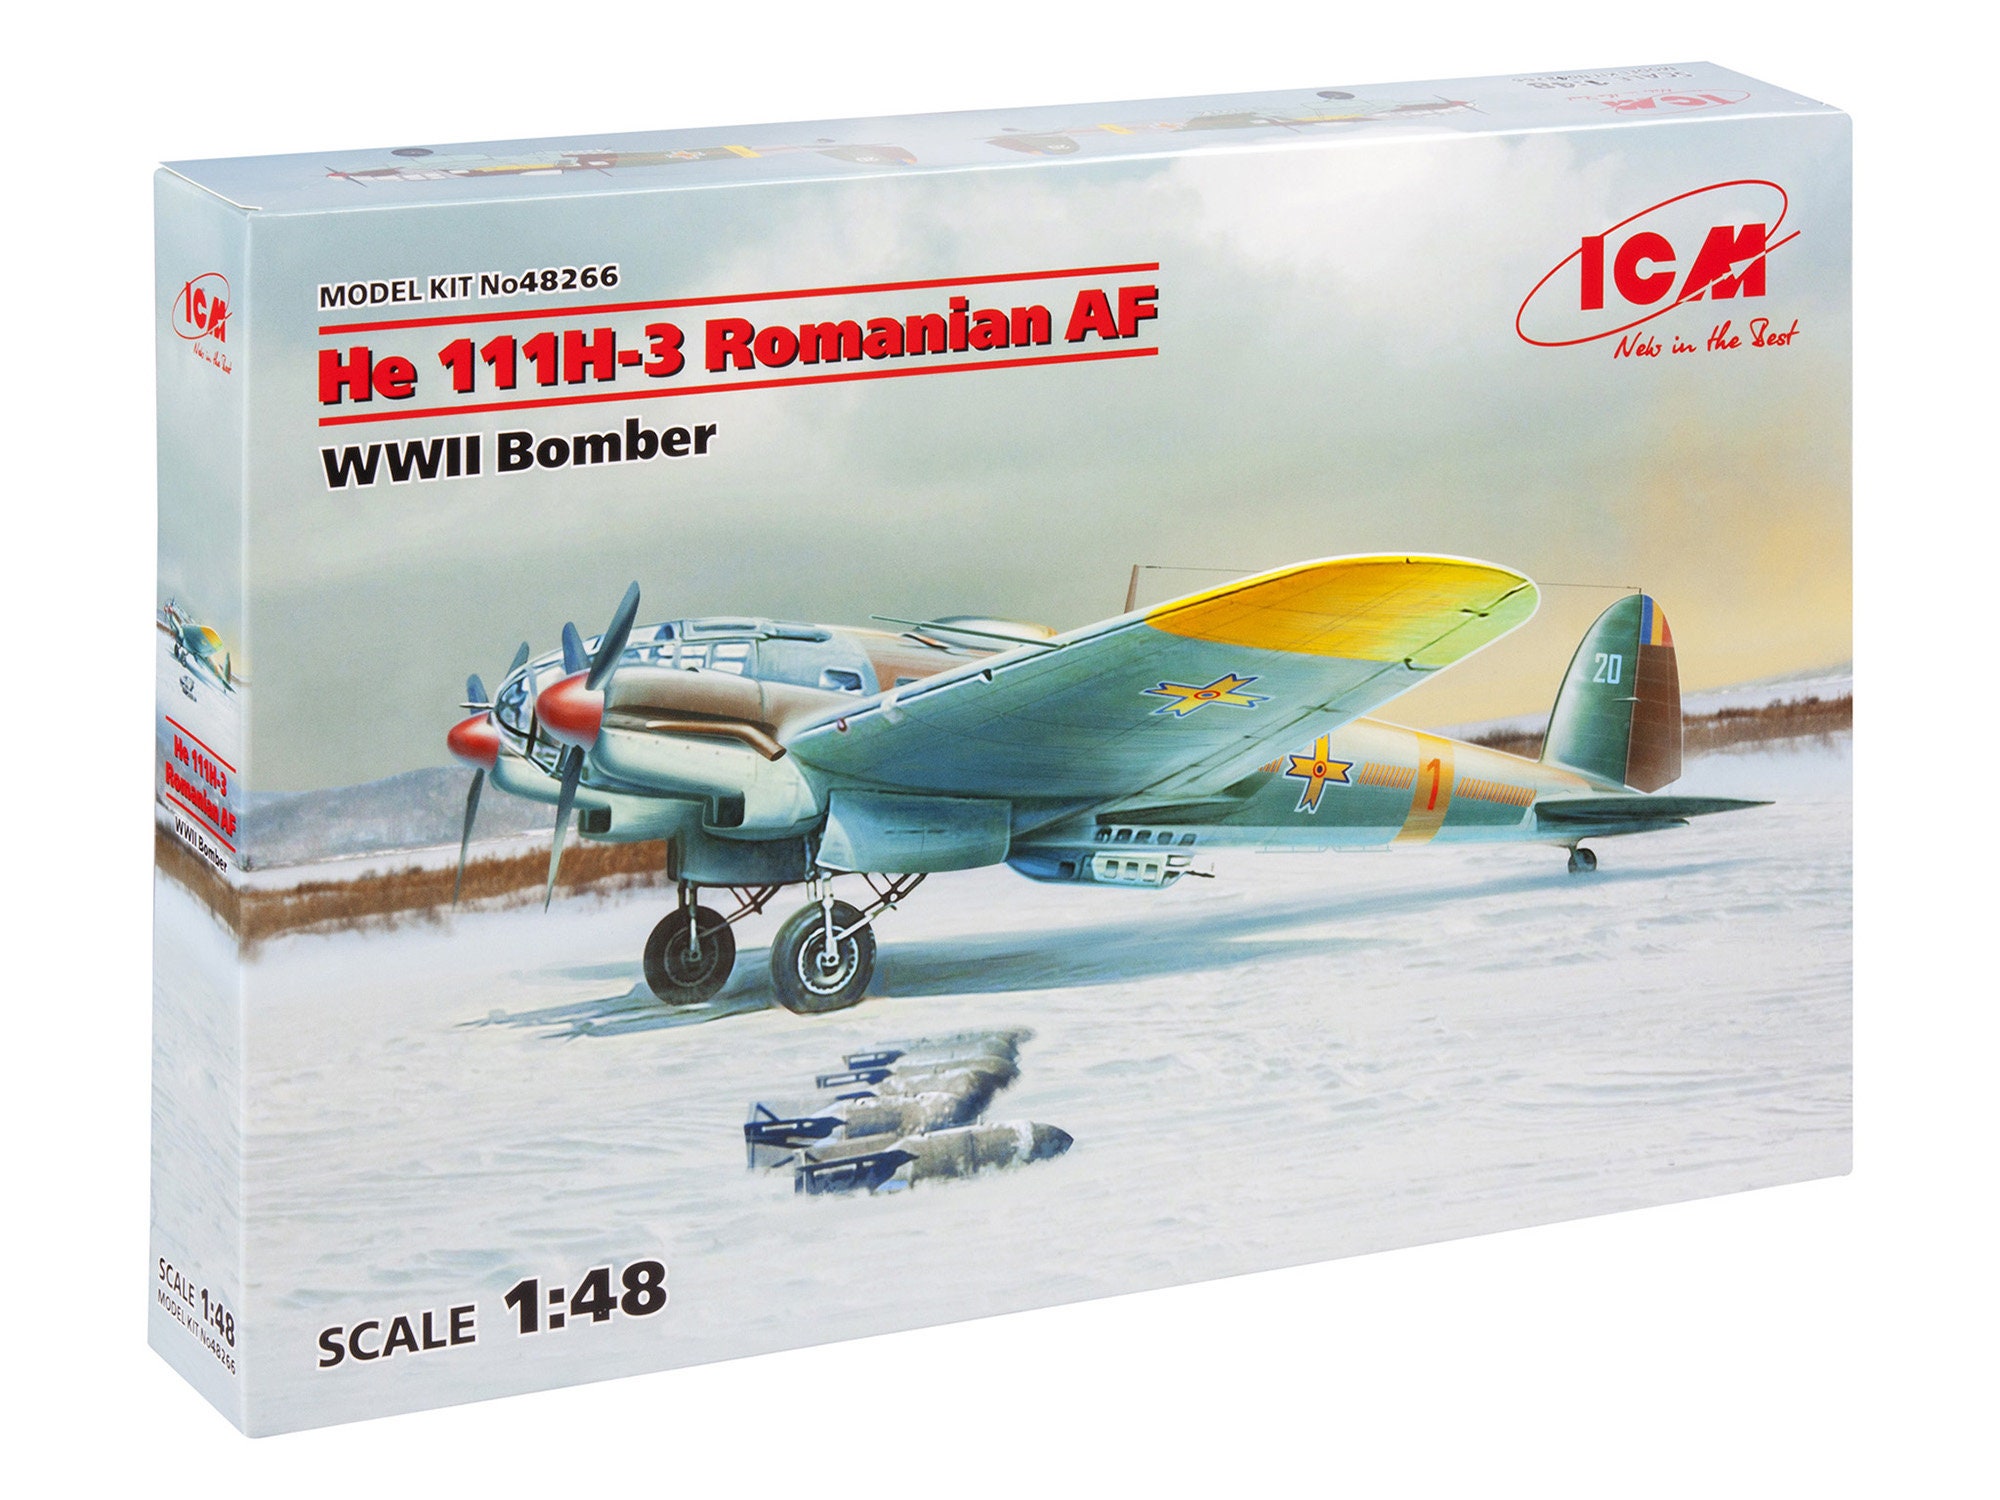 1/48 Plastic Model Airplane Kit He 111H-3 Romanian AF, WWII Bomber